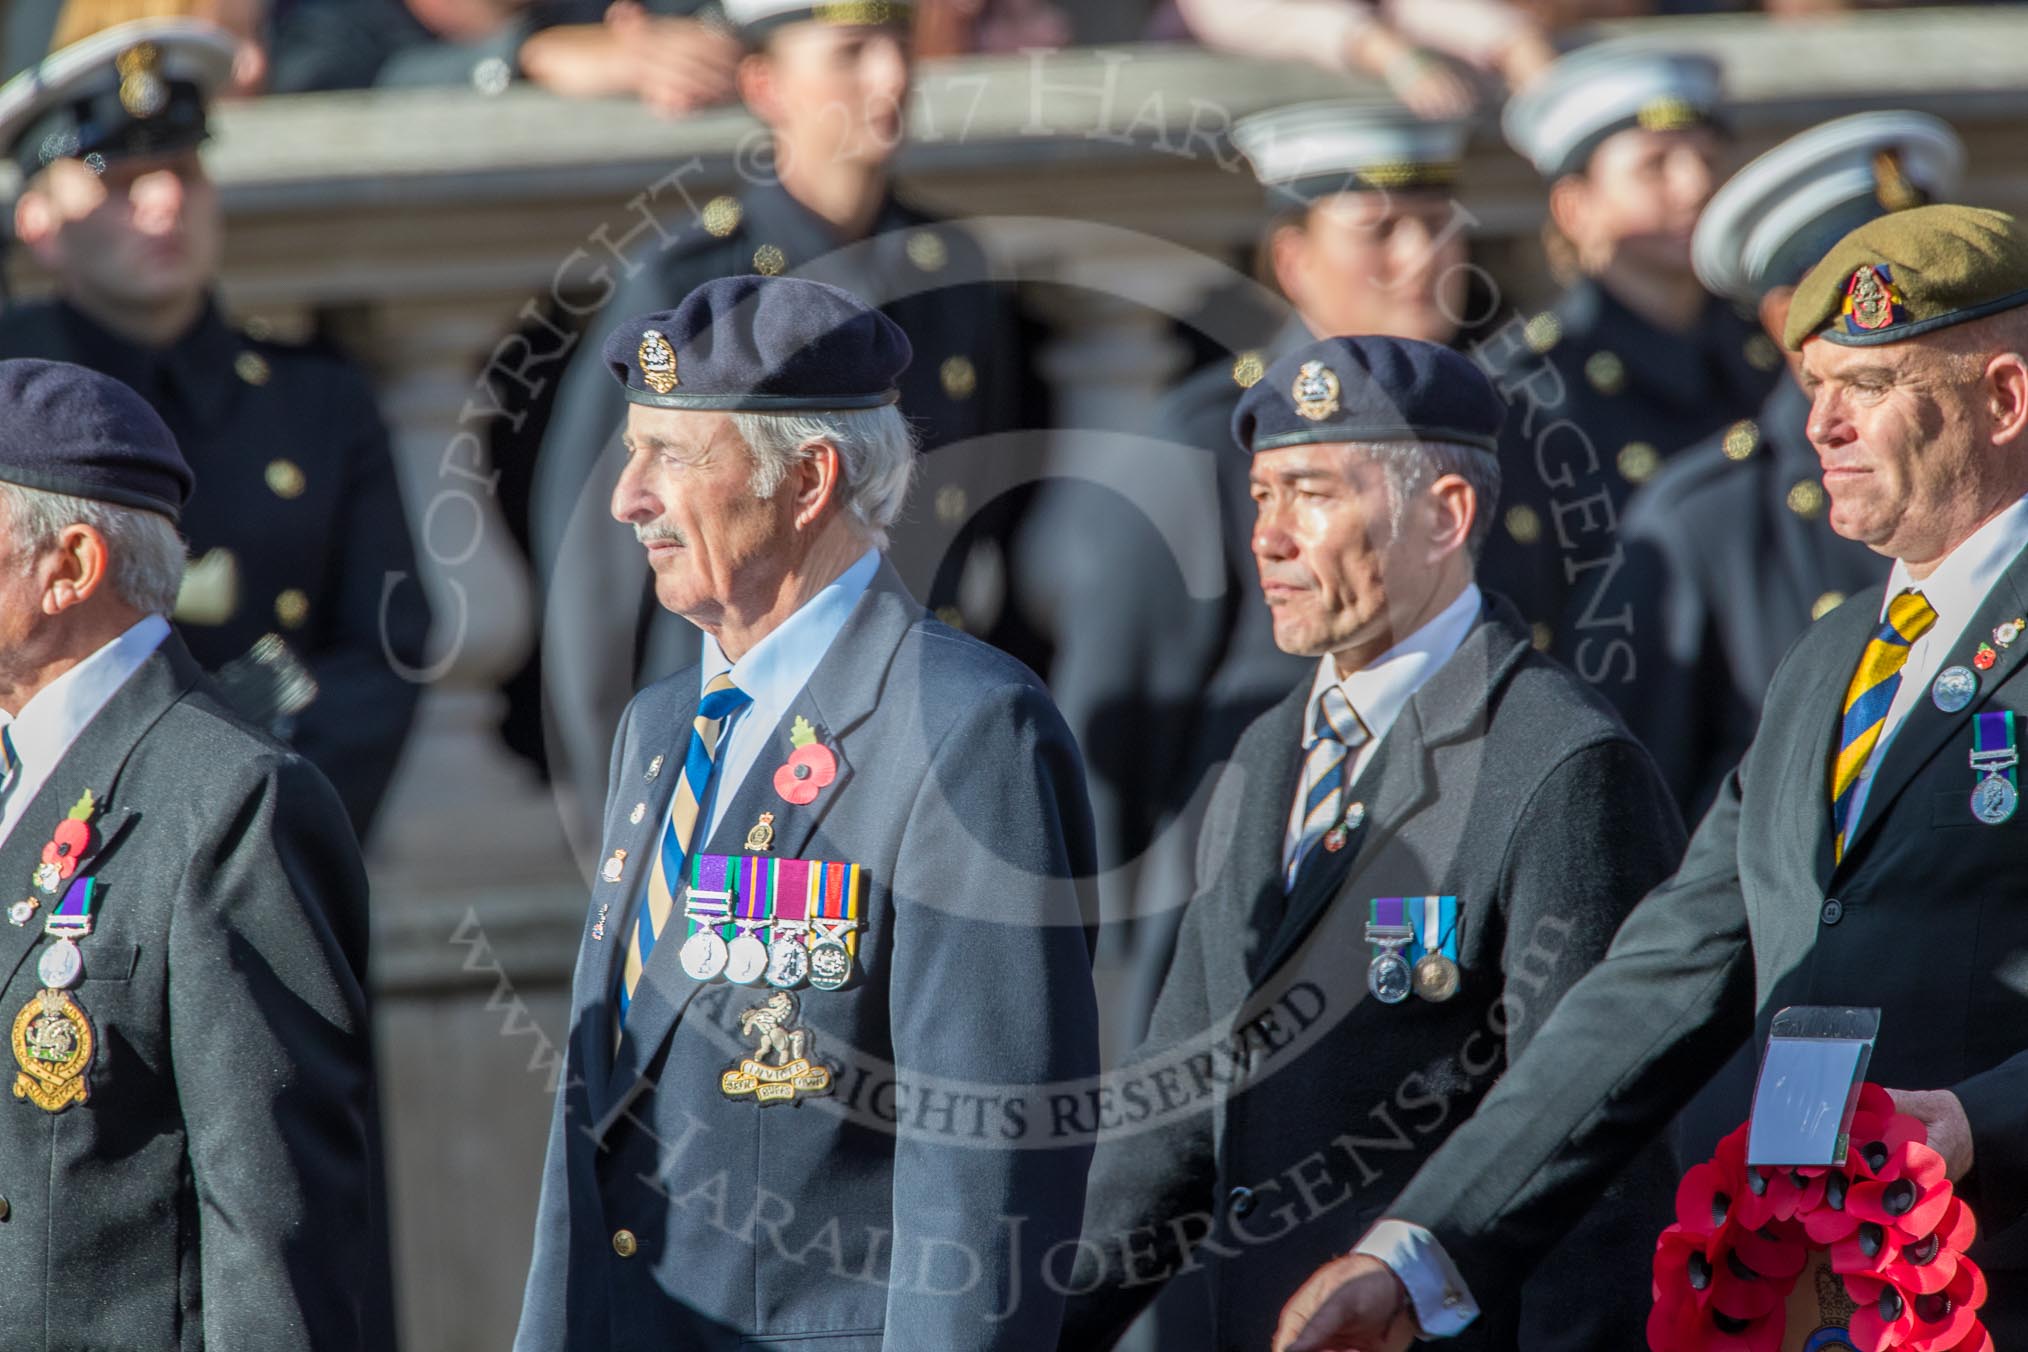 The Princess of Wales's Royal Regiment (Group A26, 60 members) during the Royal British Legion March Past on Remembrance Sunday at the Cenotaph, Whitehall, Westminster, London, 11 November 2018, 12:00.